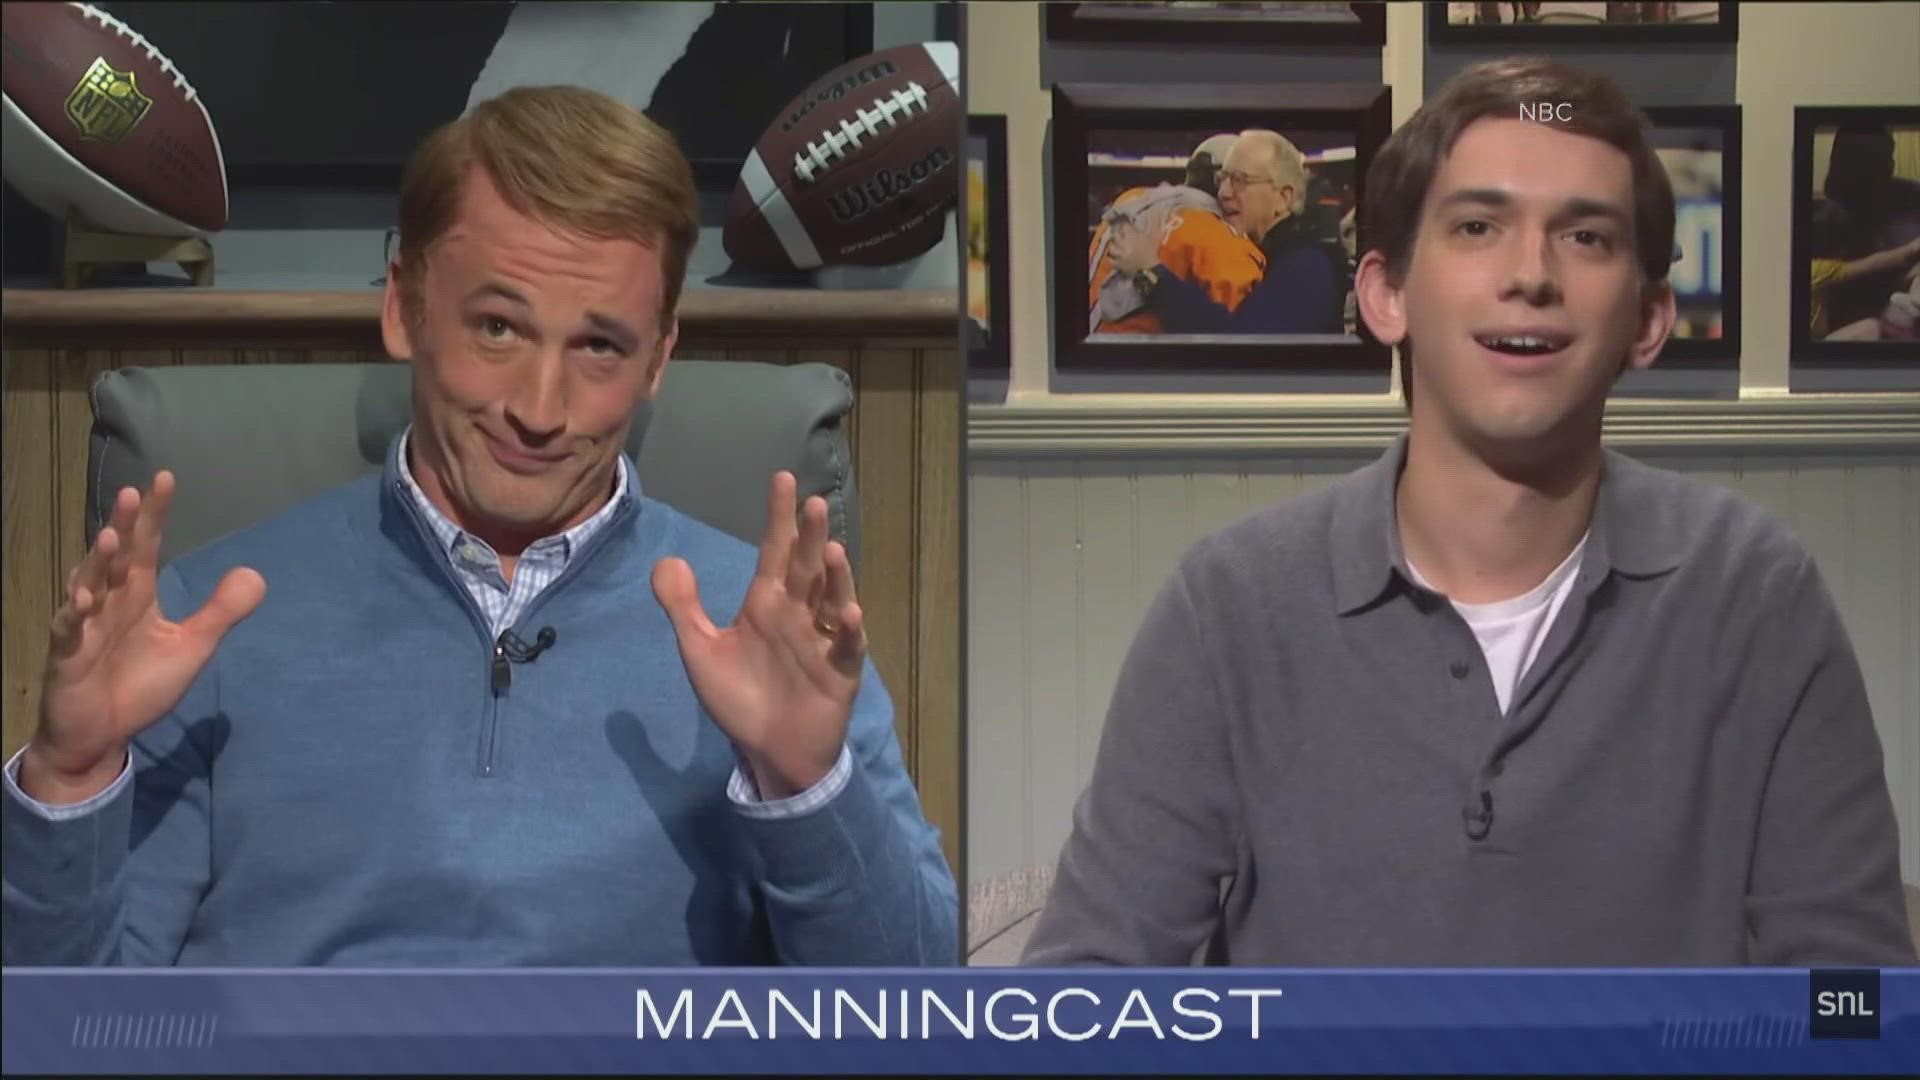 Season 48 of SNL kicked off this weekend with host Miles Teller as former Broncos quarterback Peyton Manning.